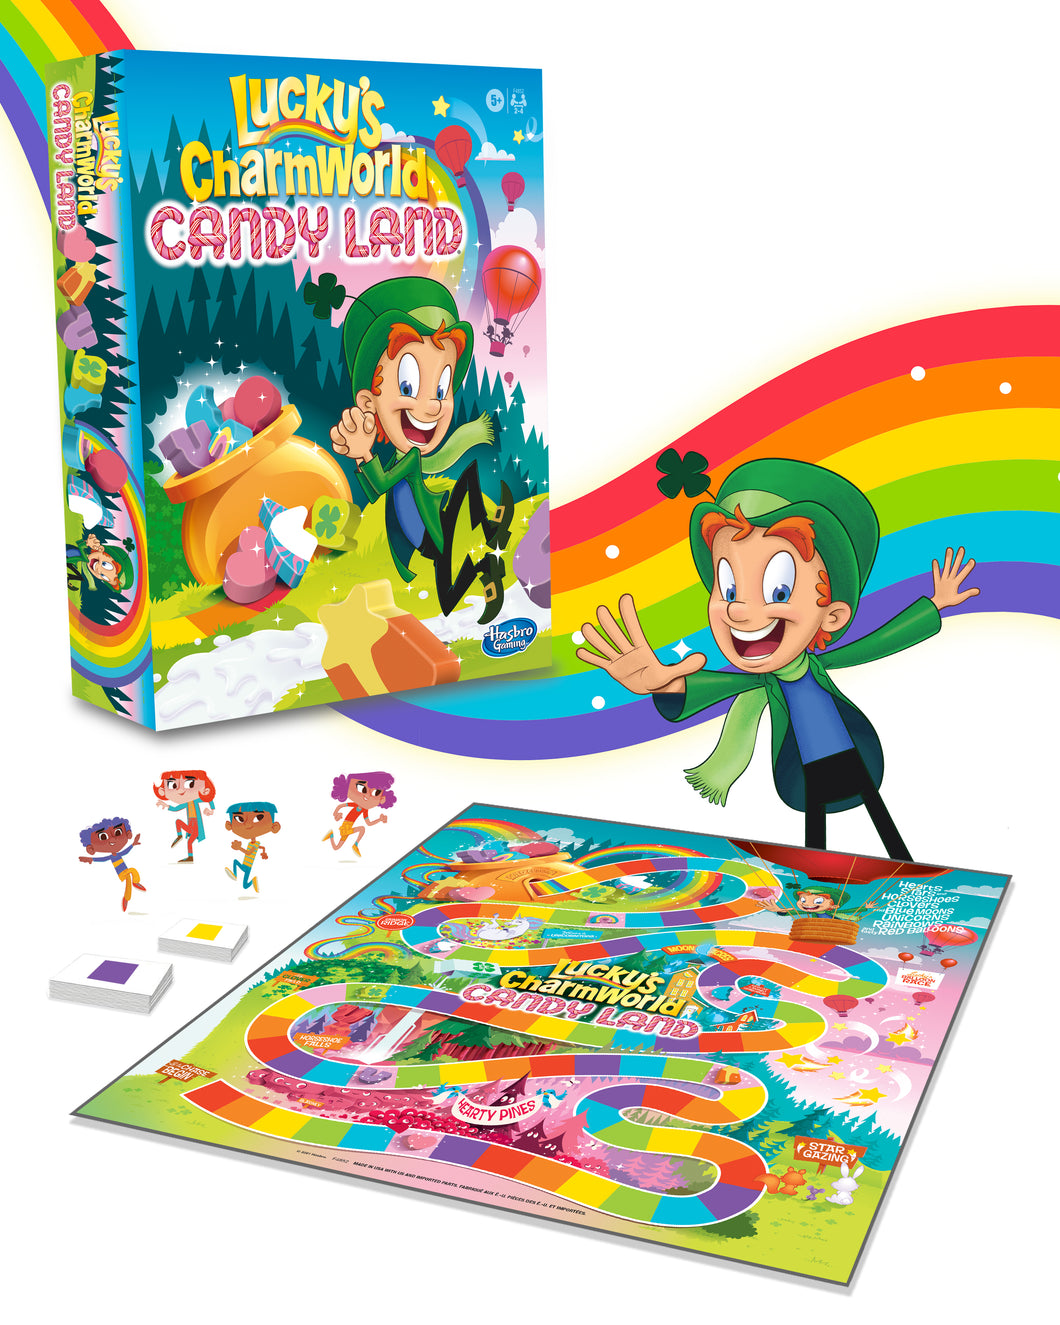 The box and contents of Lucky's Charmworld Candy Land board game laid out.